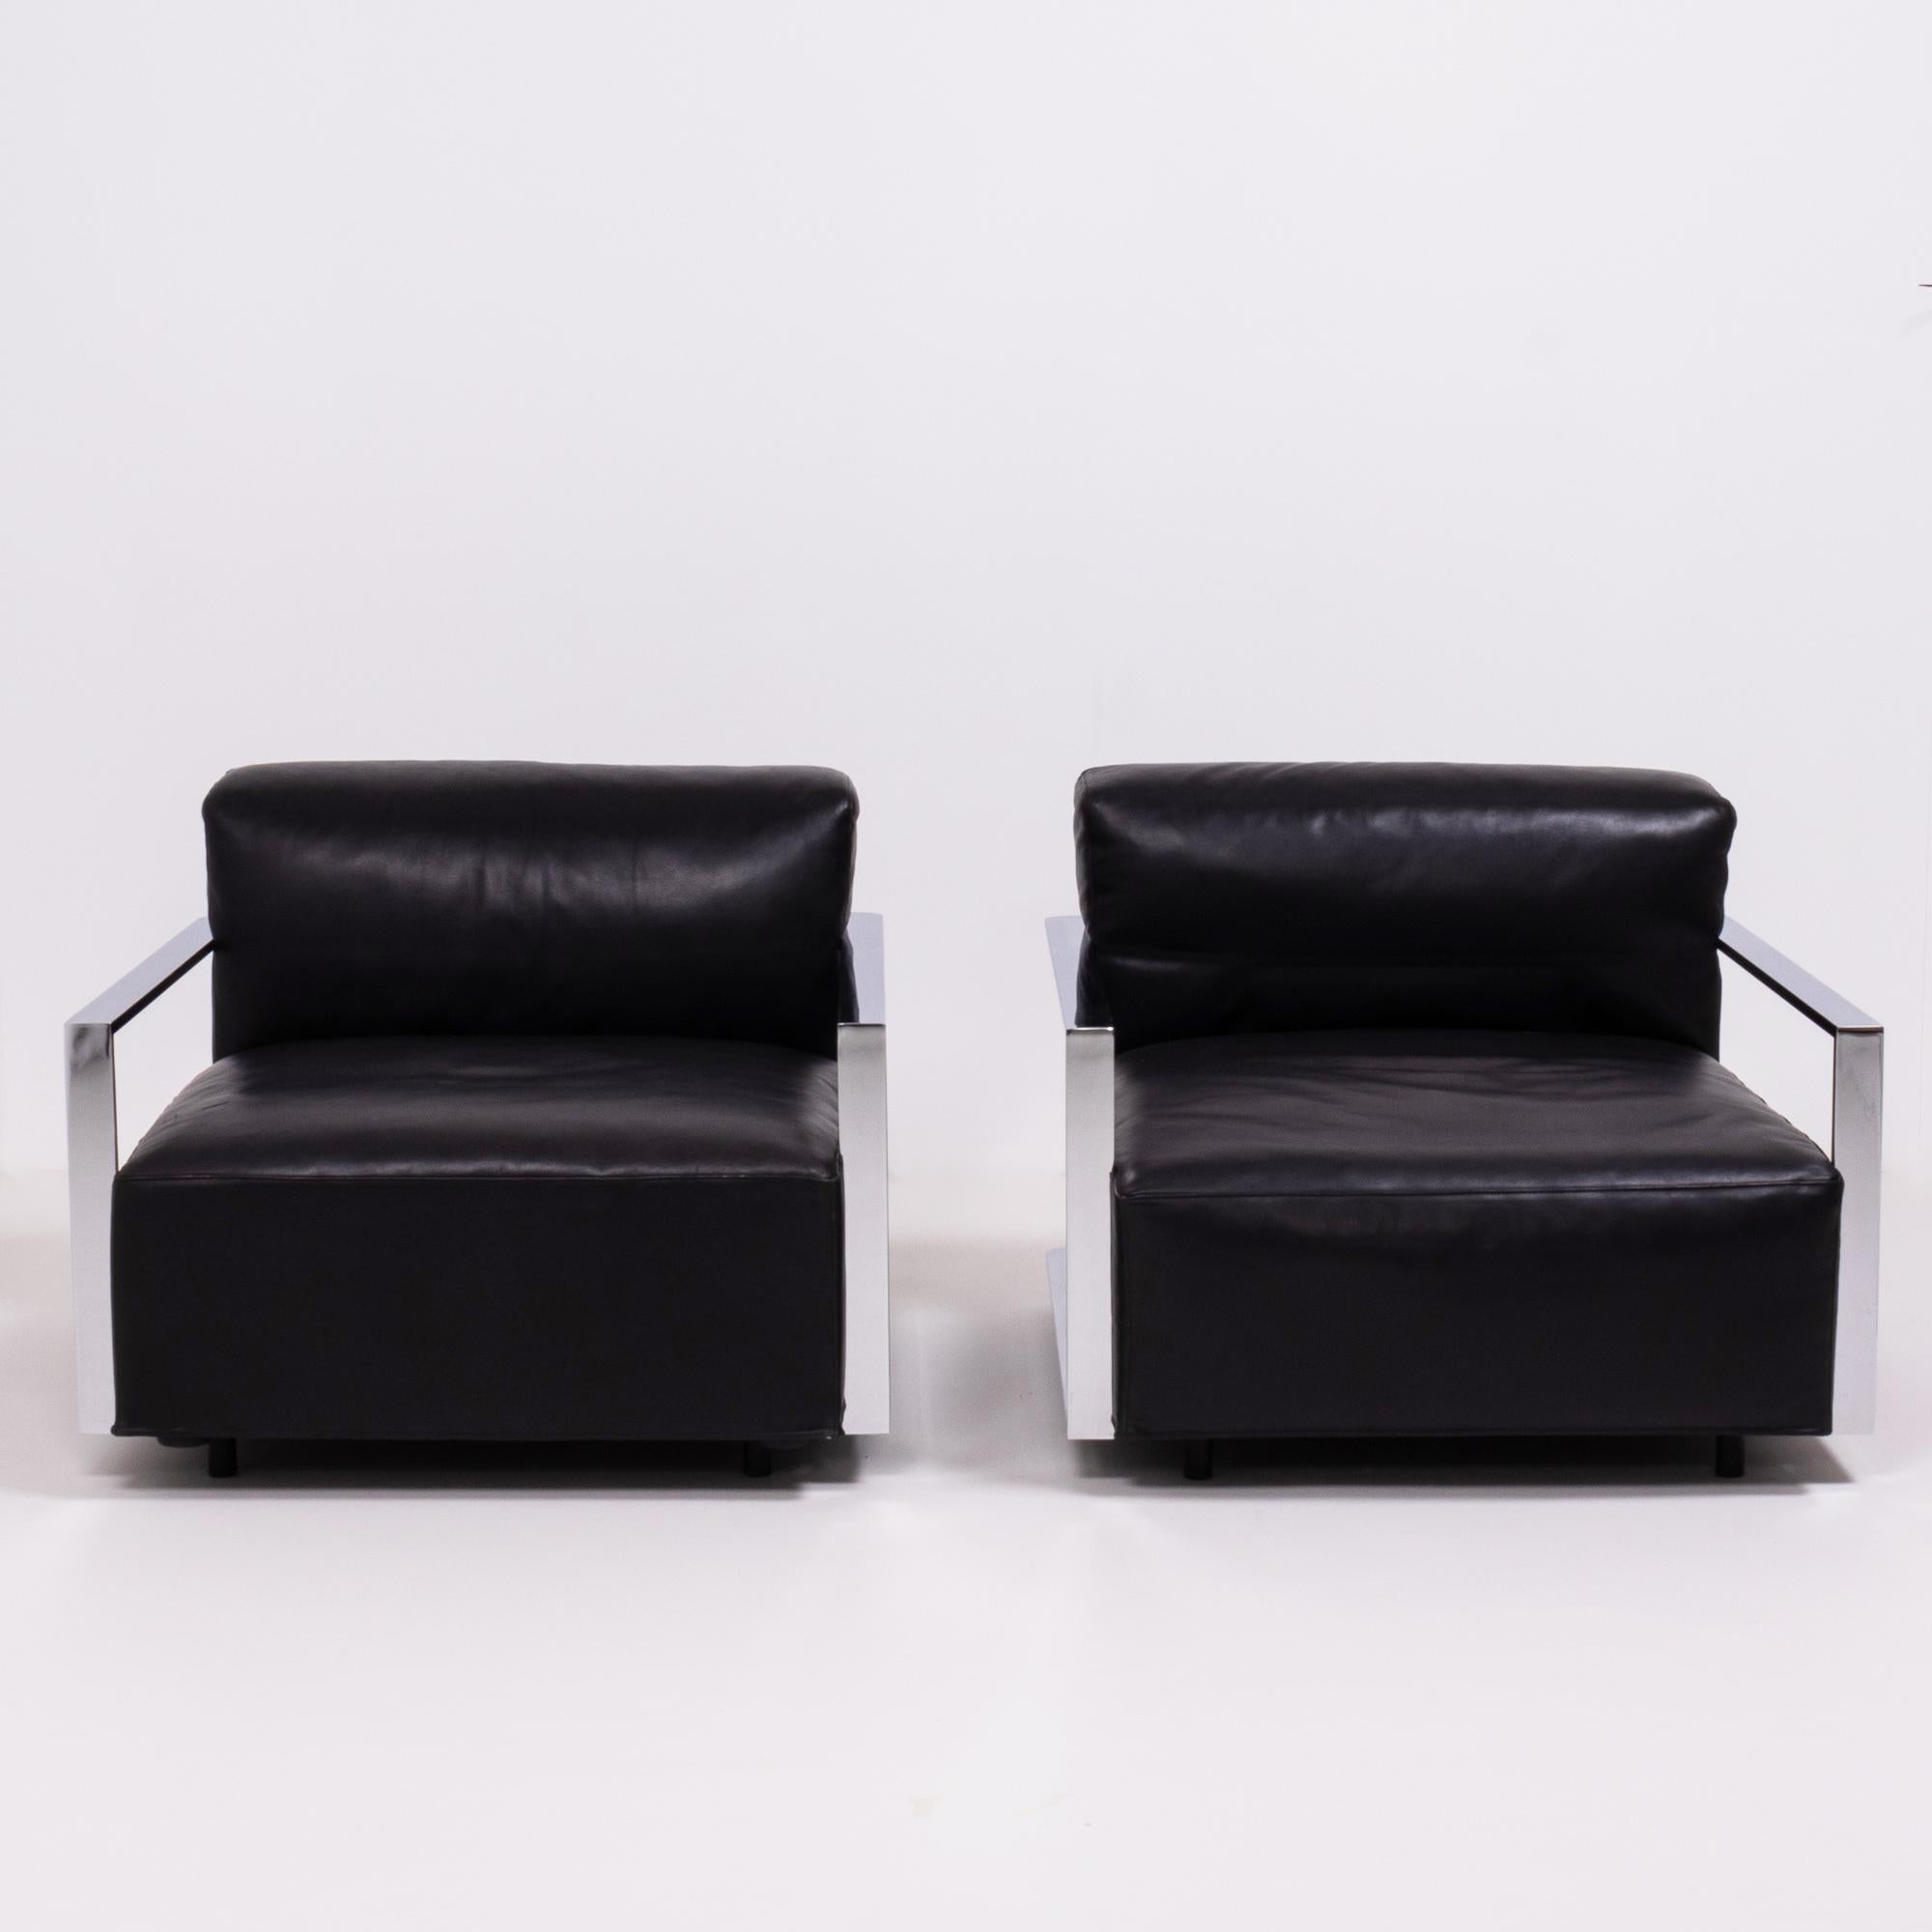 Designed by Arik Levy for Baleri Italia in 2008, the St Martin Armchairs are sleek yet comfortable.

Featuring an angular polished chrome frame, the modular chairs have separate back and seat cushions upholstered in soft black leather.